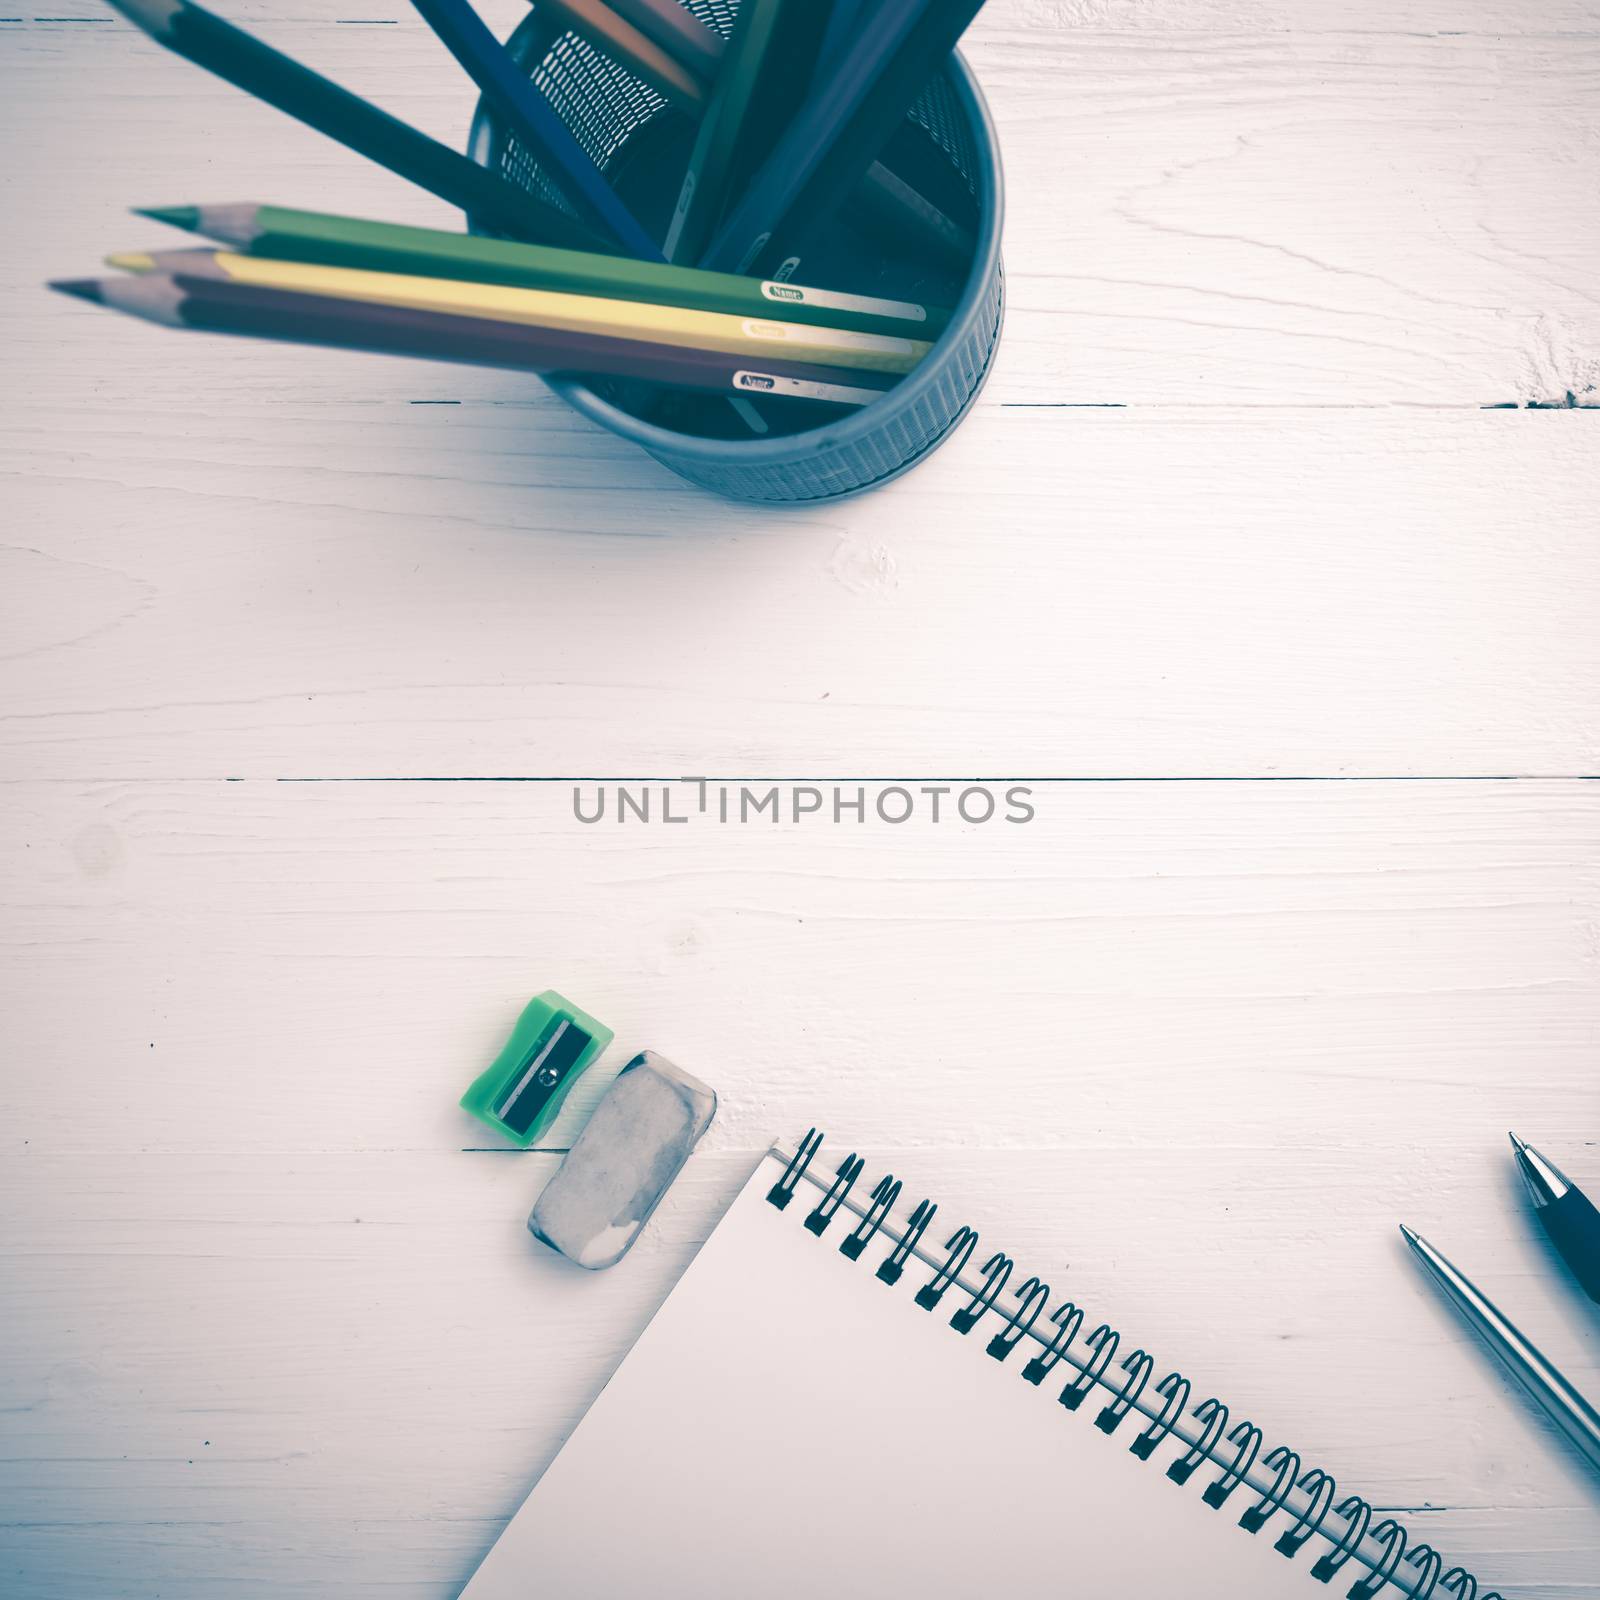 notepad with color pencil on white table view from above vintage style